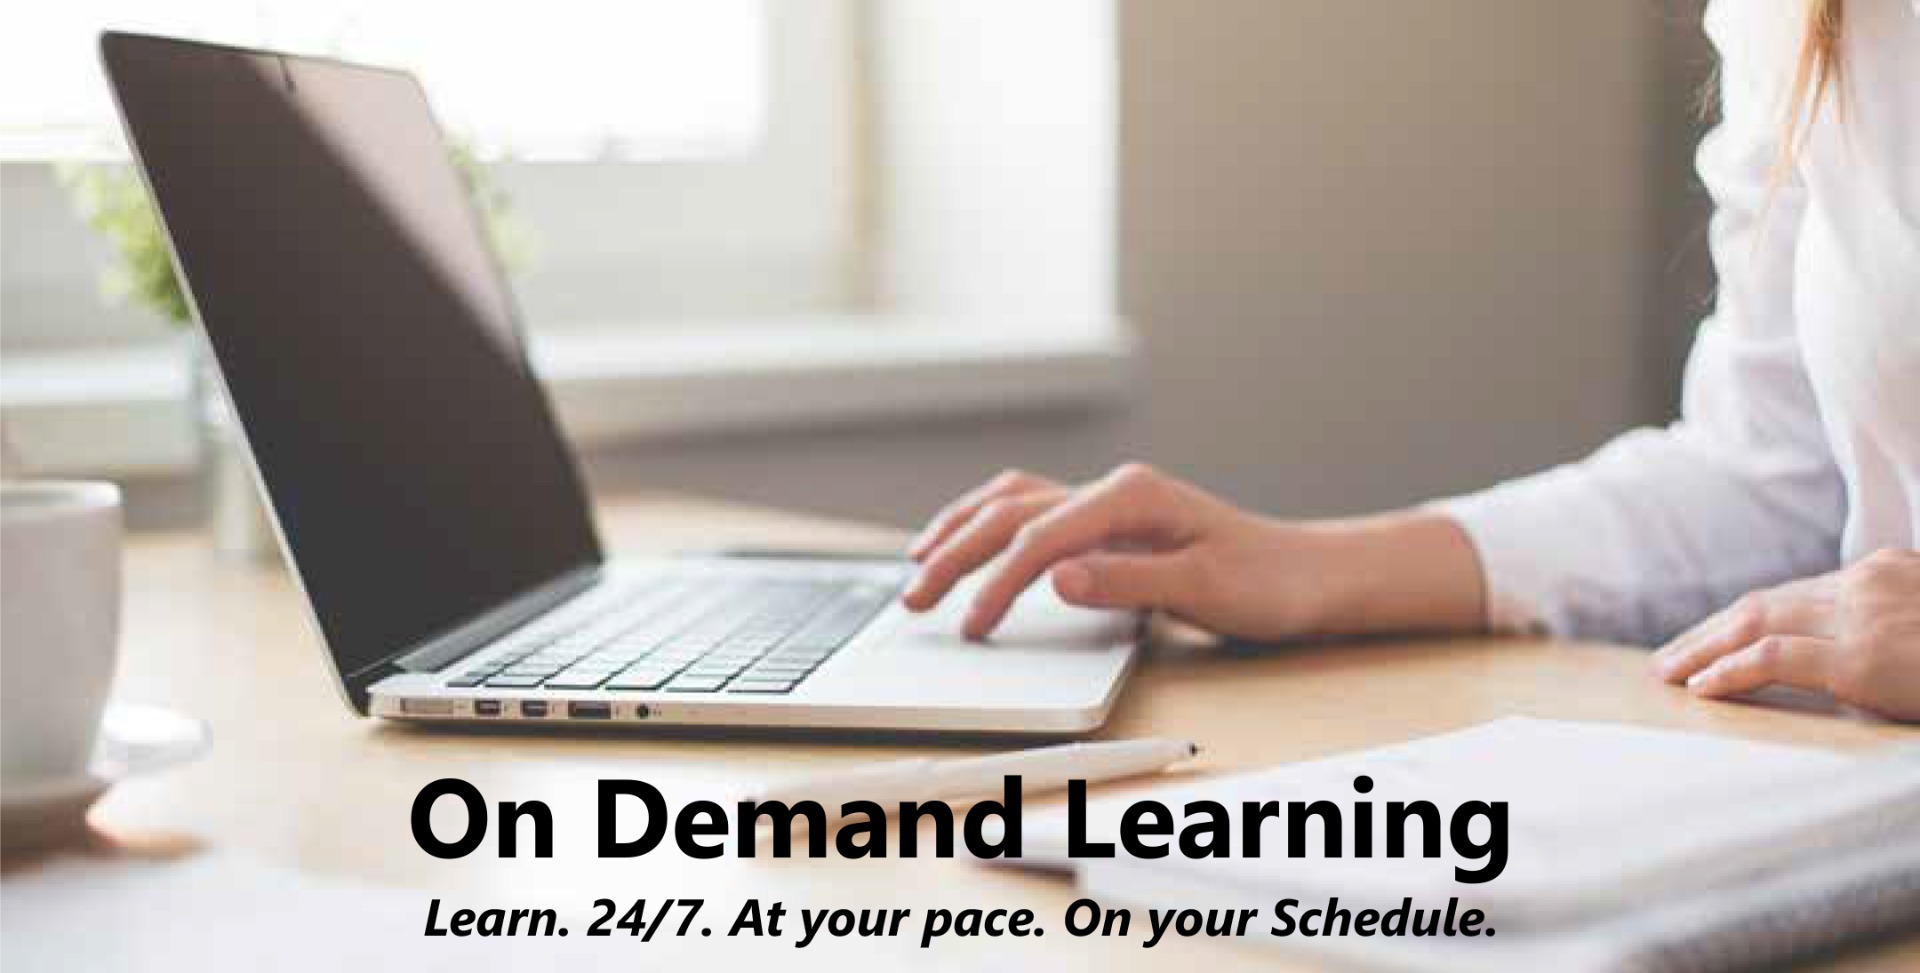 On Demand Learning